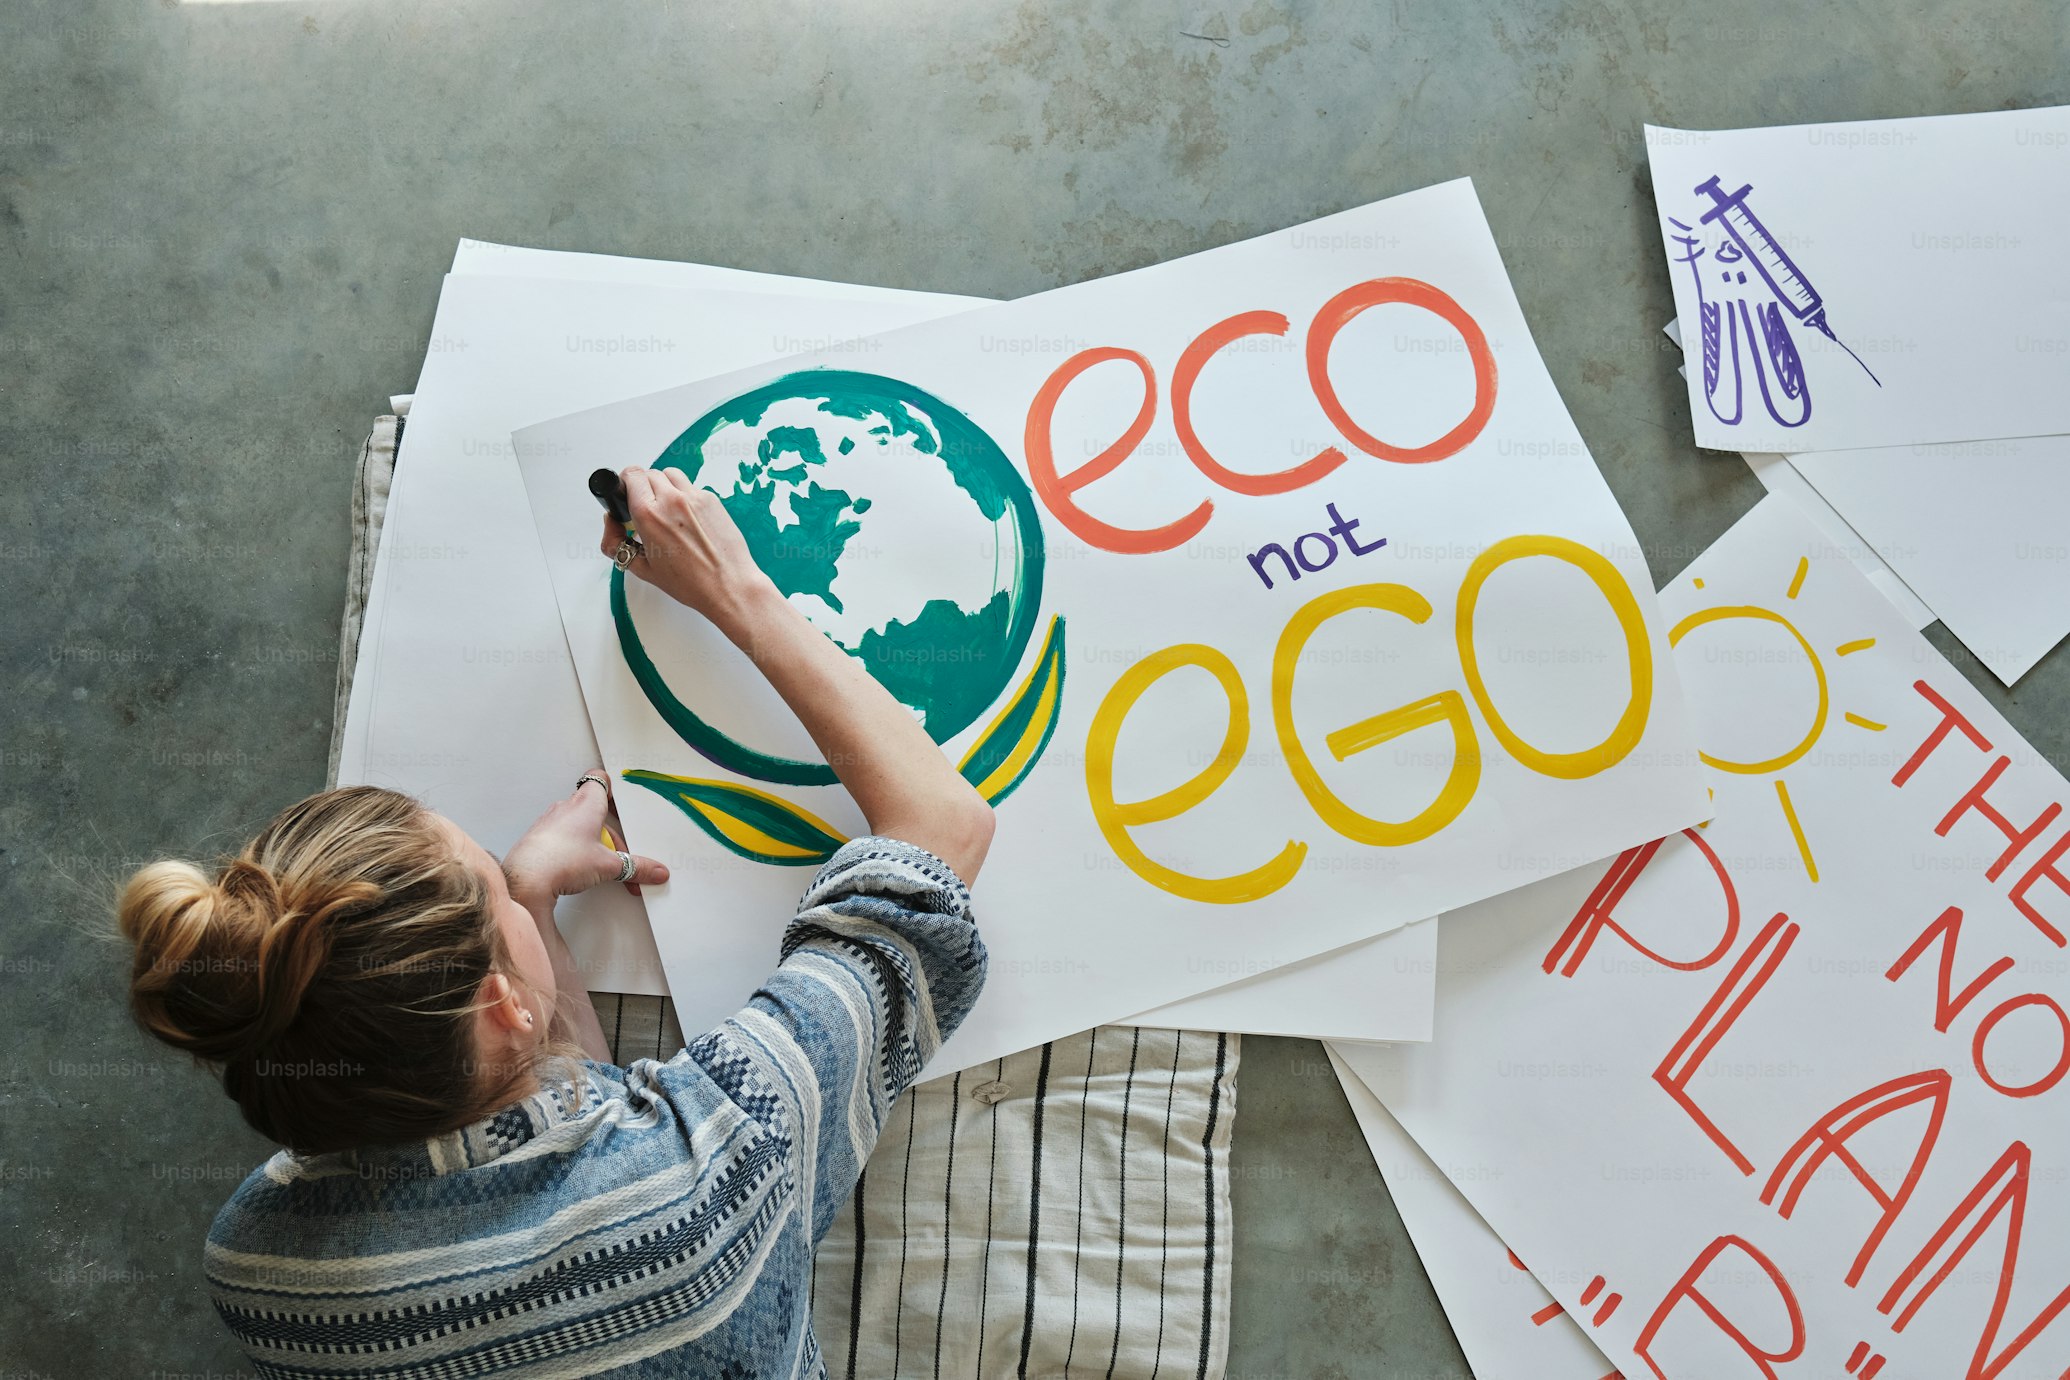 support eco-friendly brands